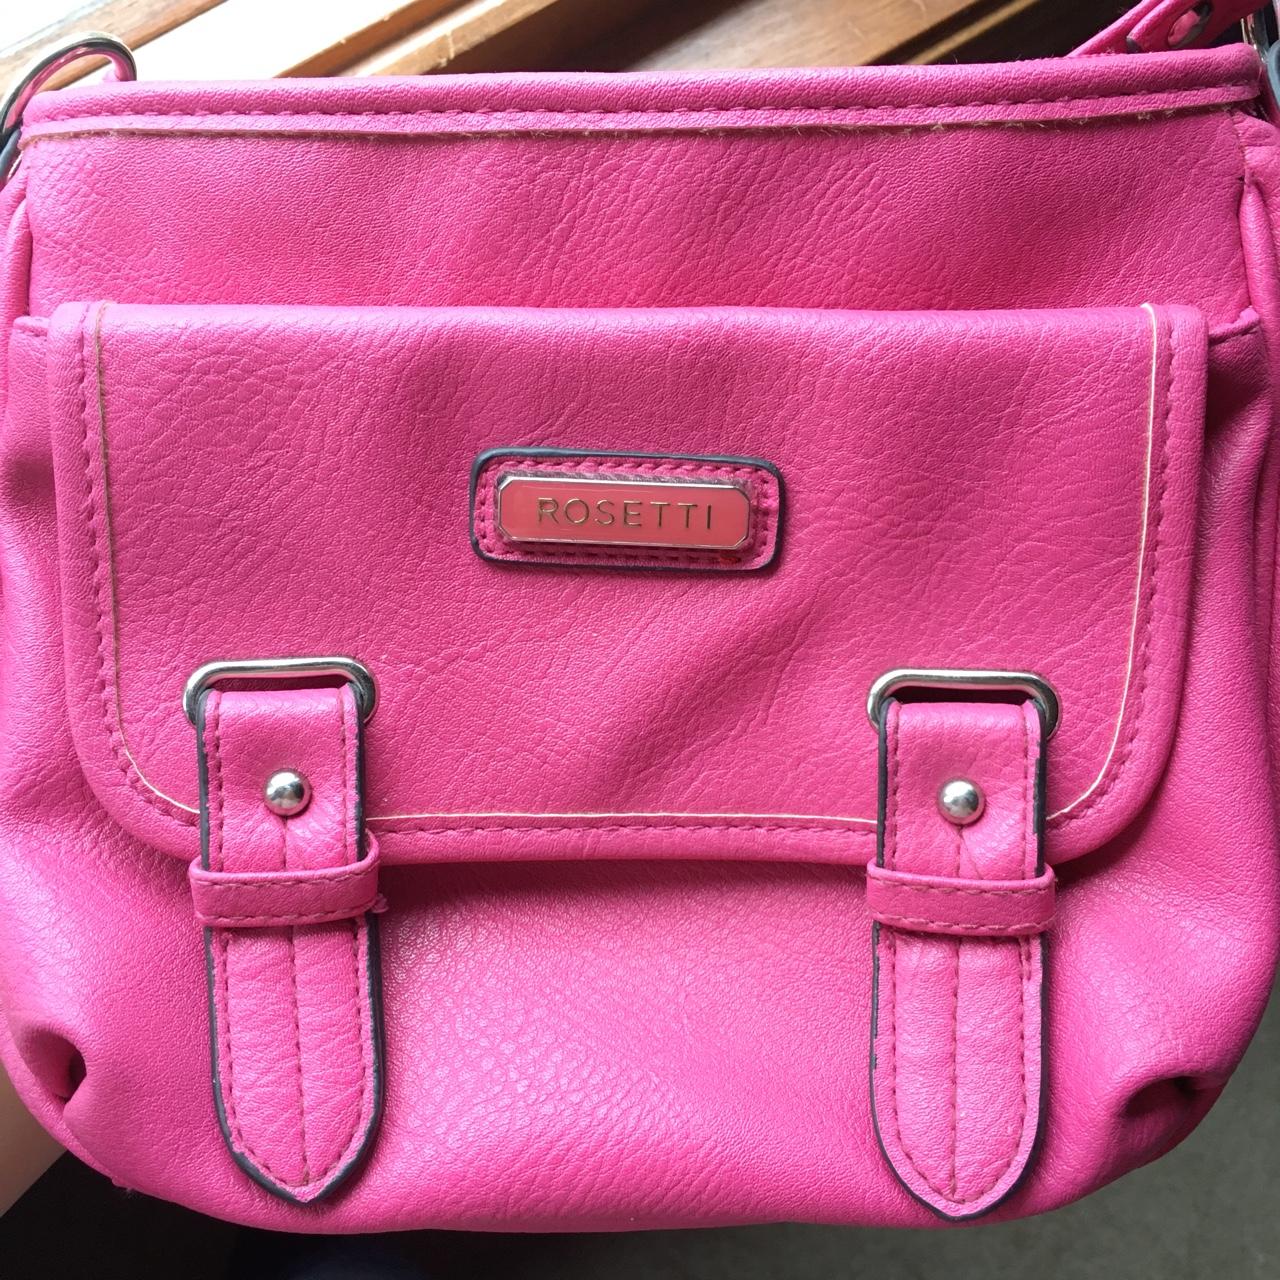 Rosetti Purse Pink - $13 - From Leah